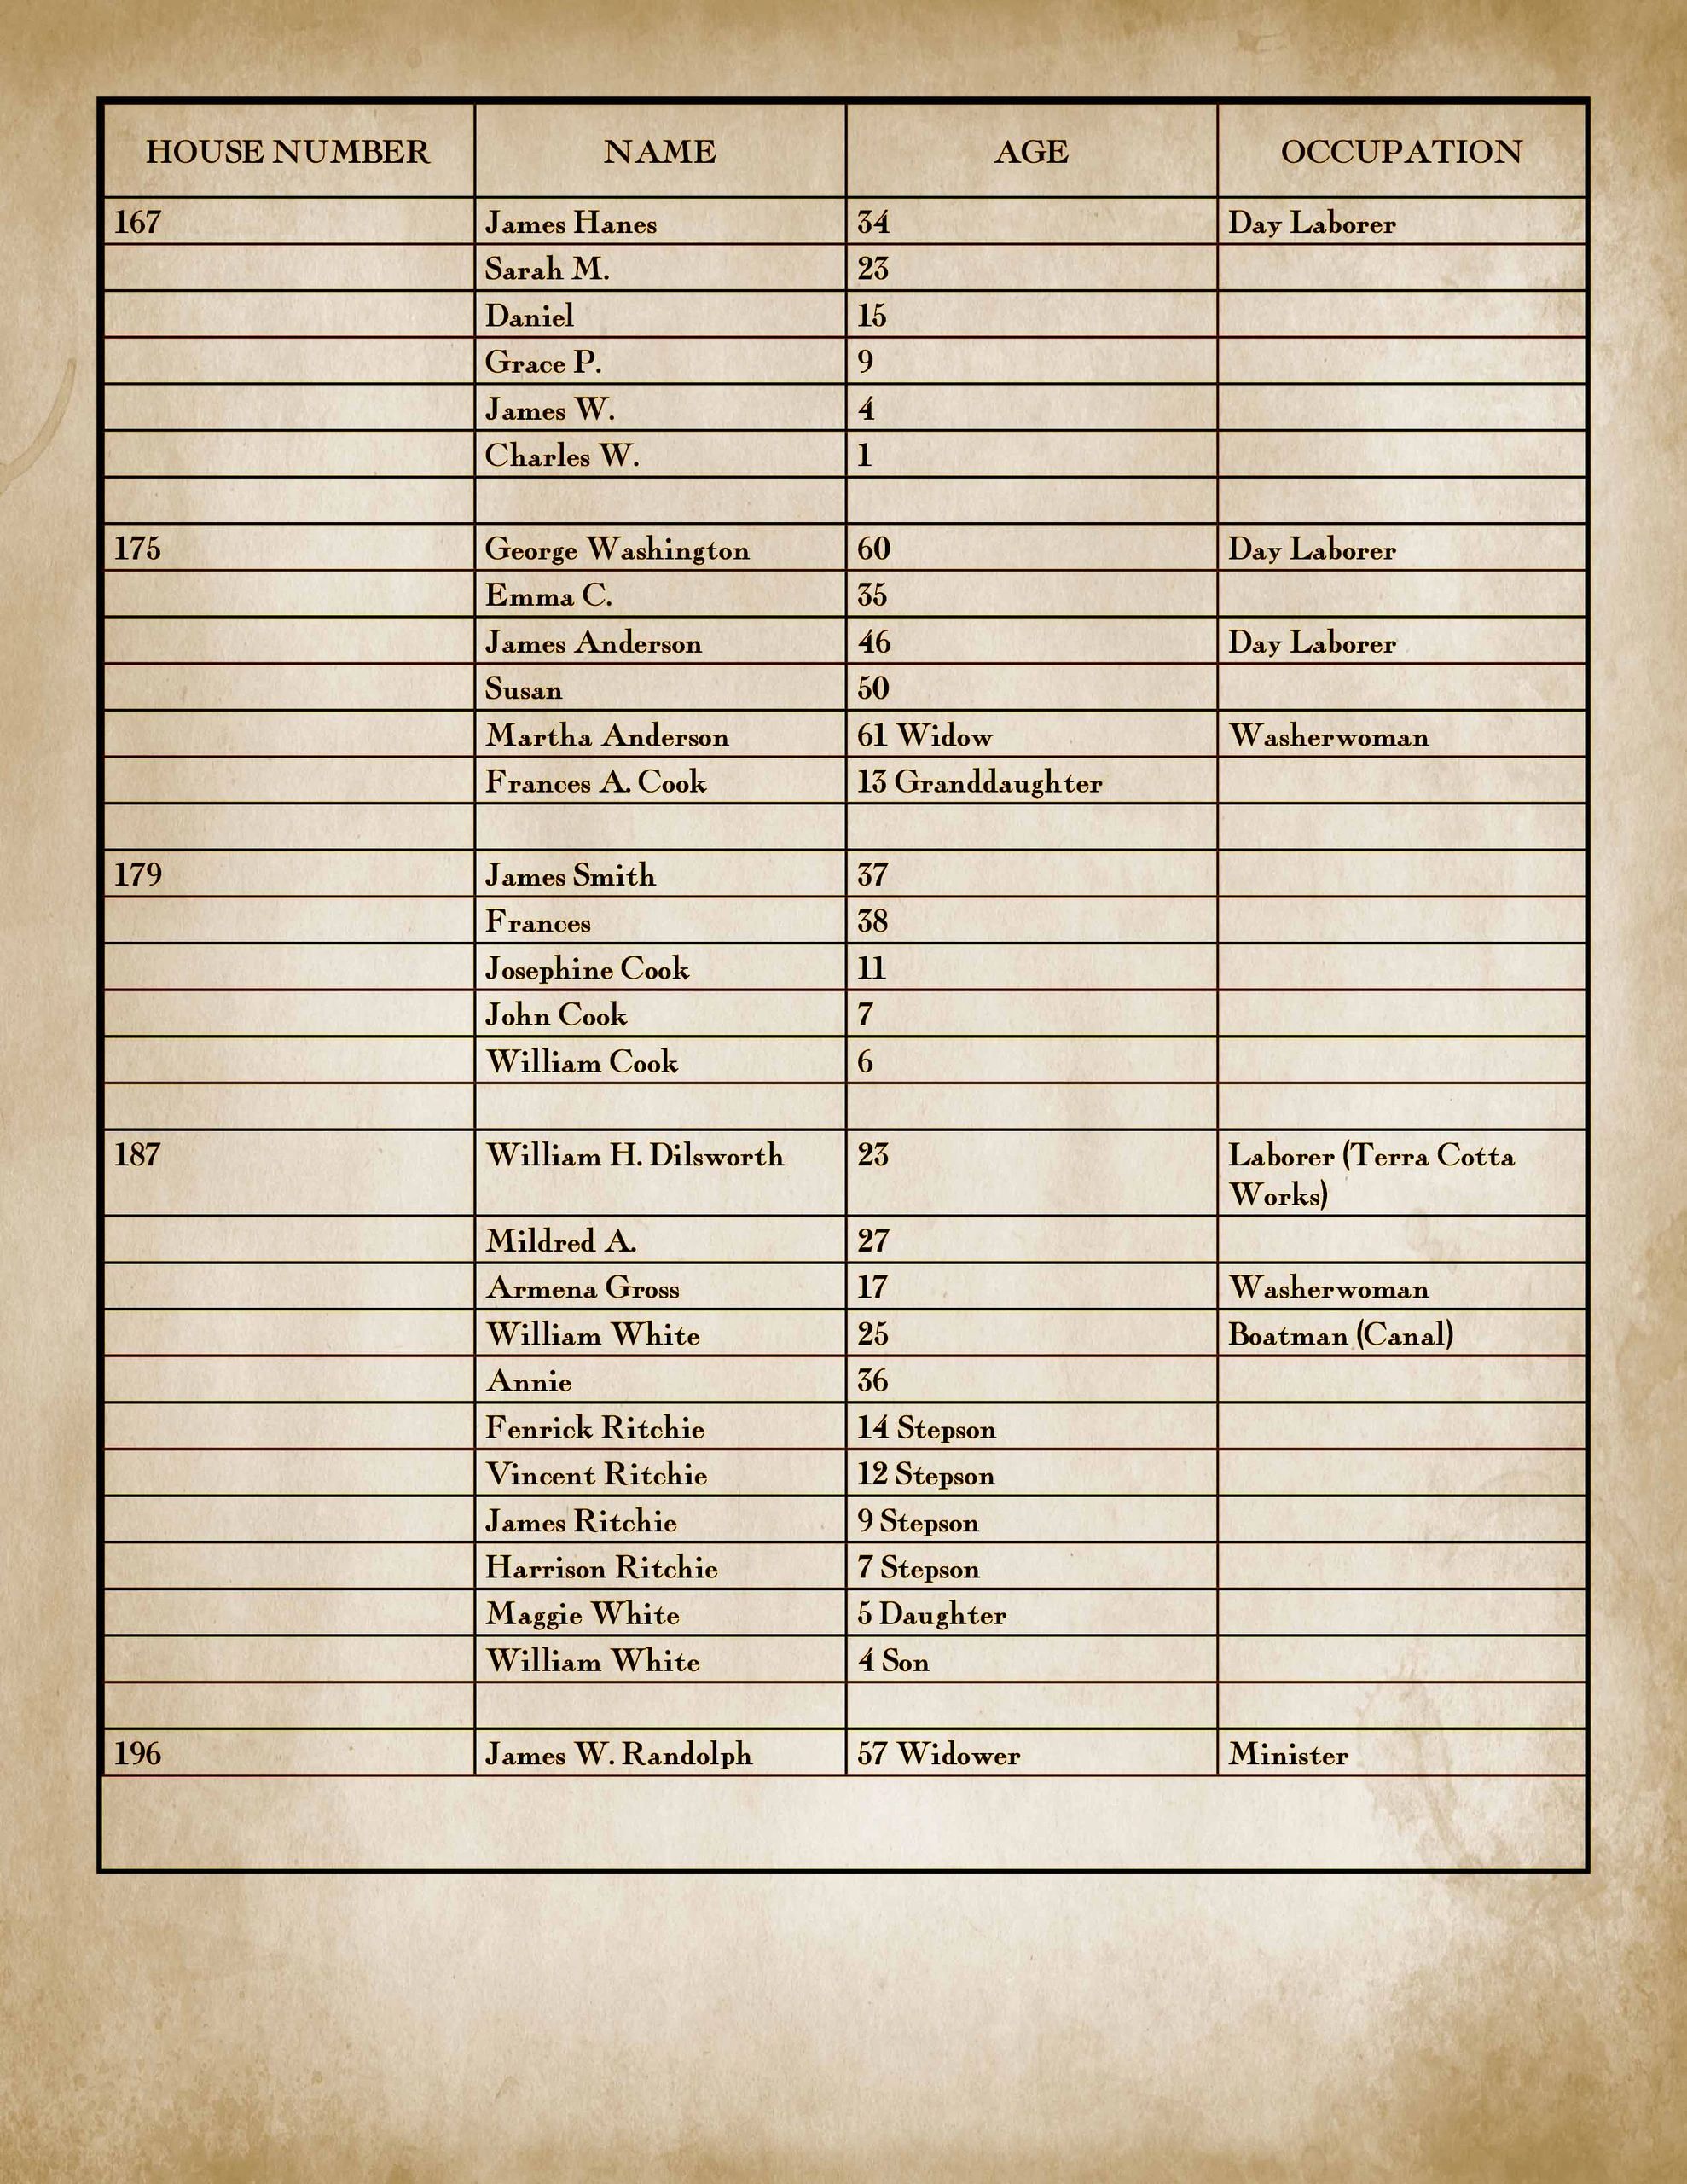 North Lincoln Avenue 1900 Census, page 2; featuring the House Number, Name, Age, and Occupations